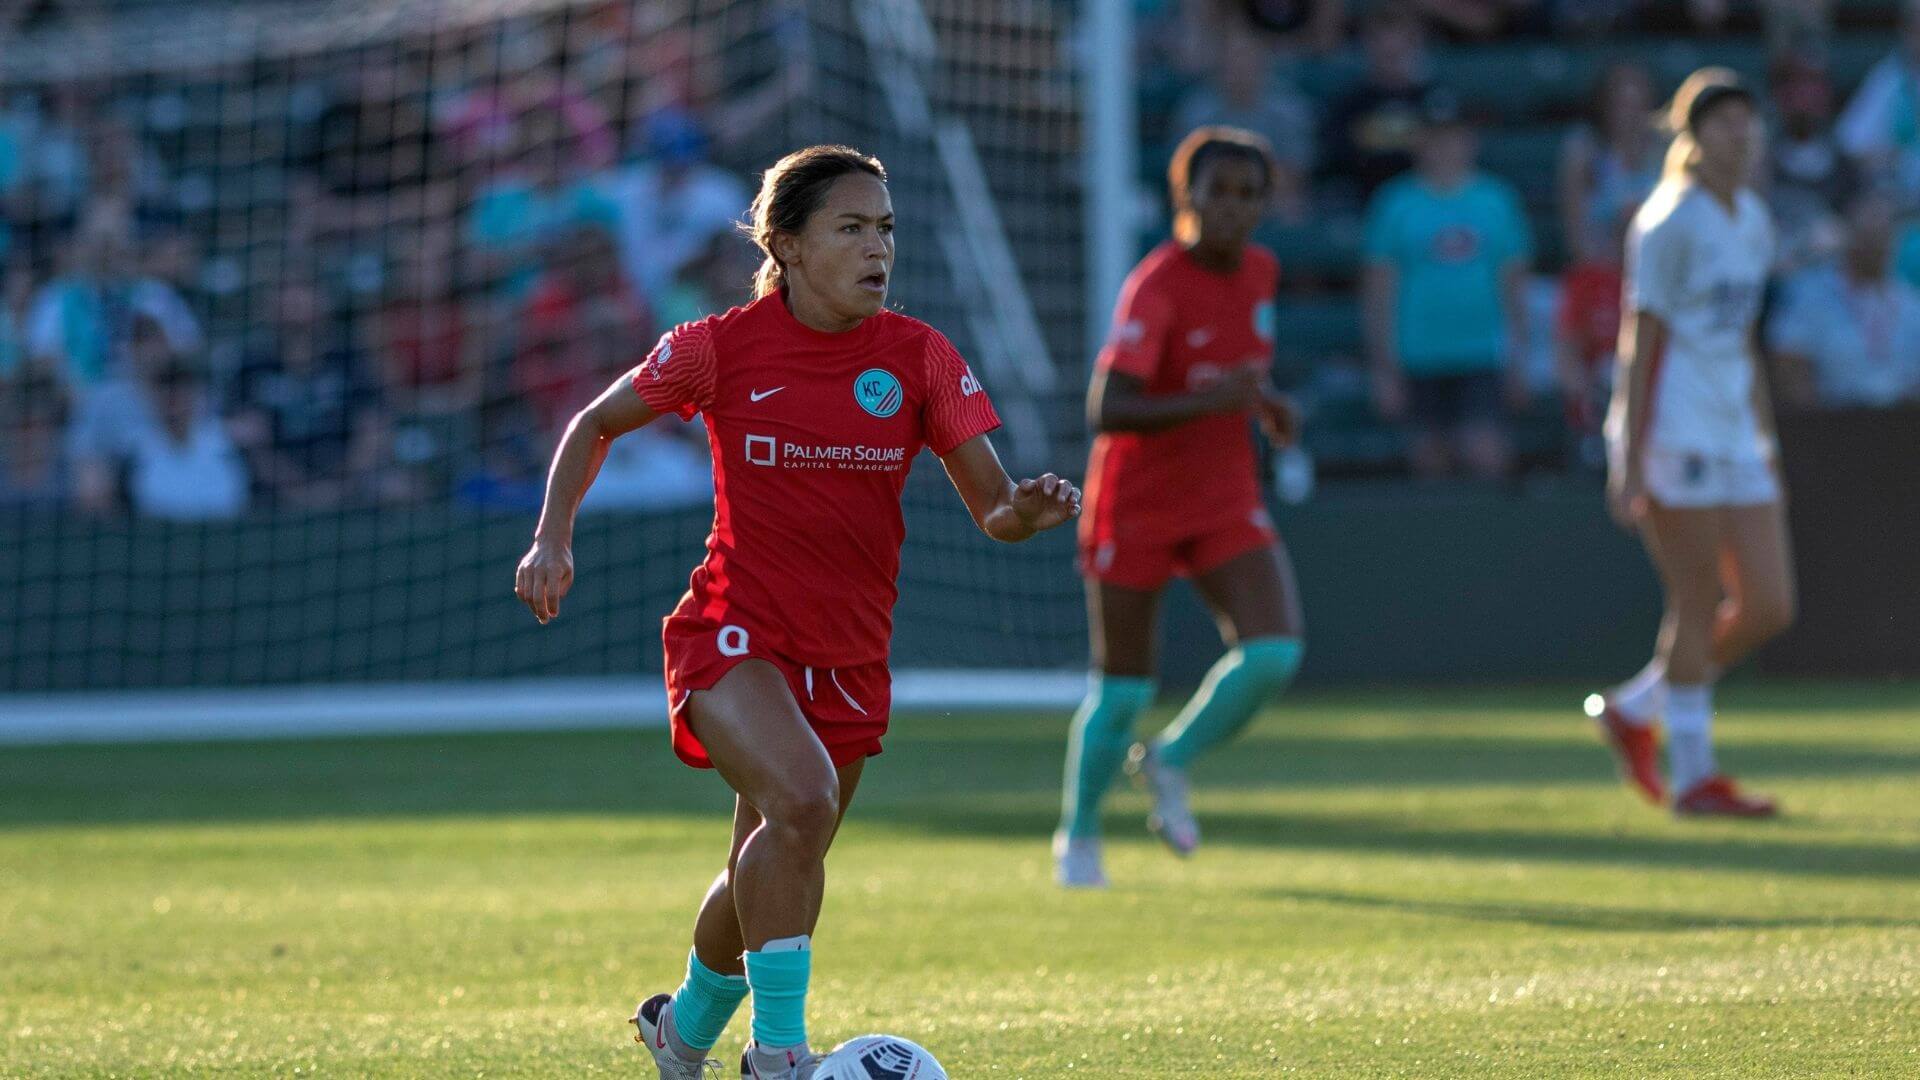 Asian Pacific American players in the NWSL